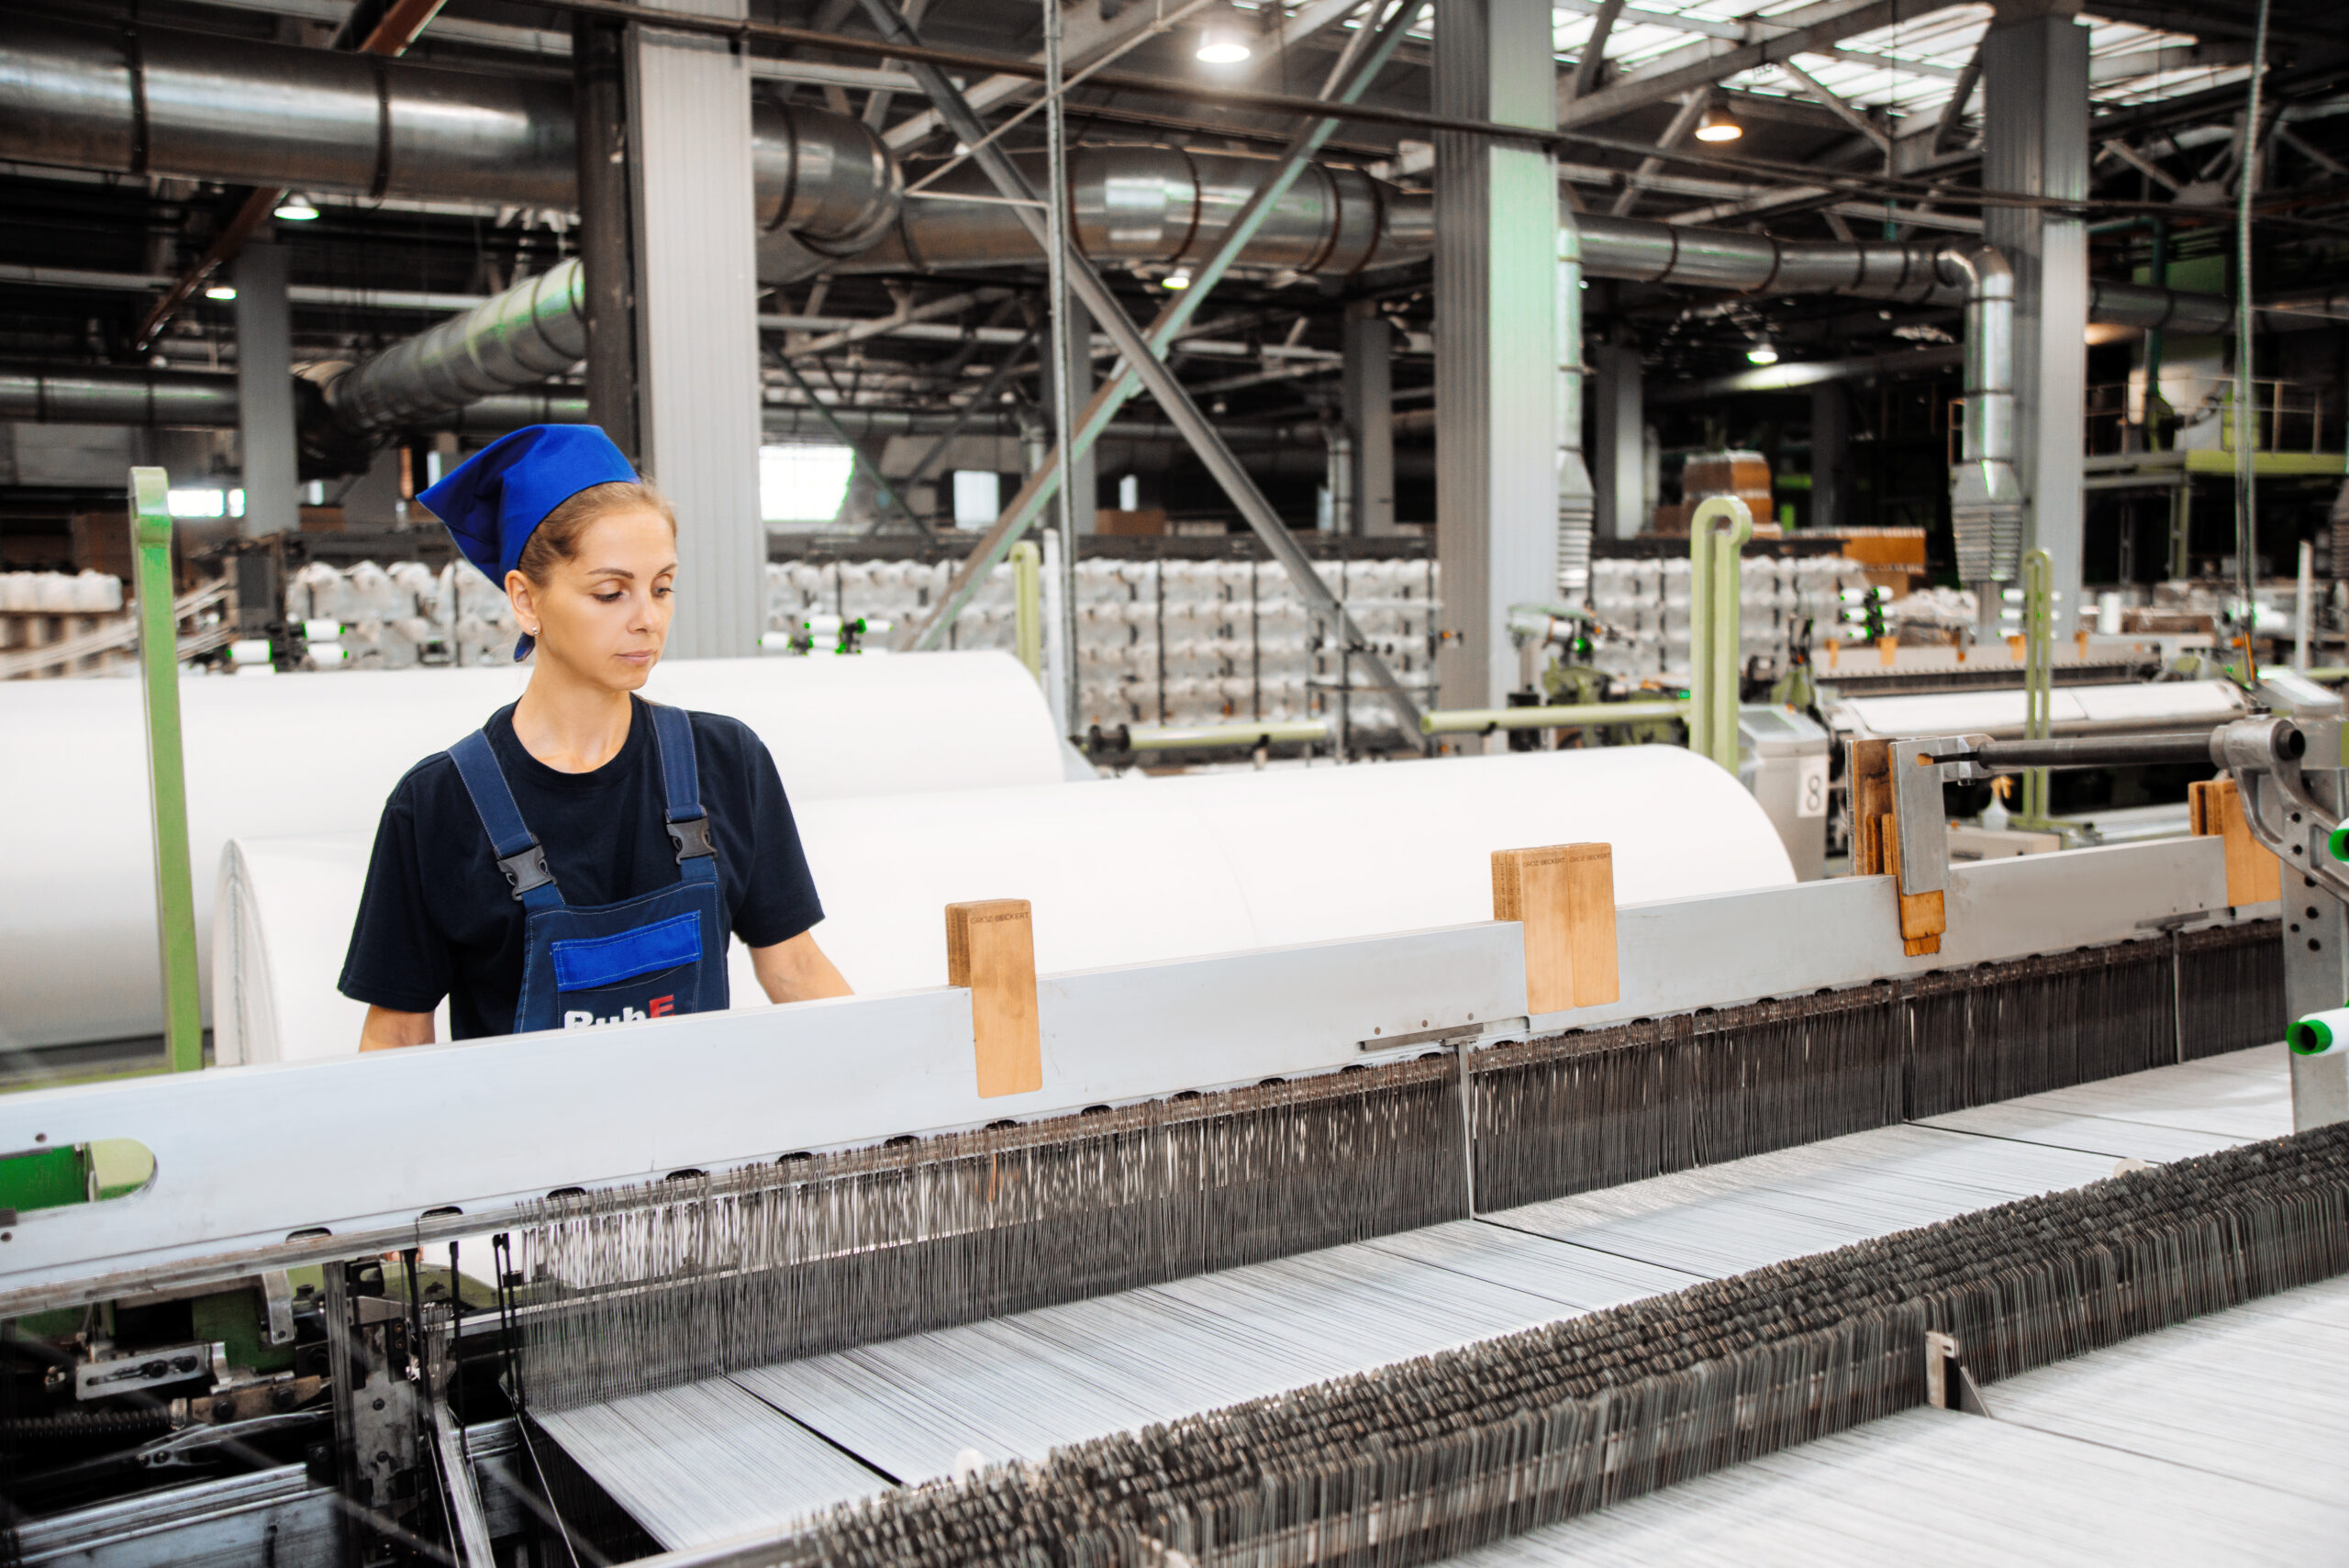 Soyuztextile-ST LLC to receive the status of a backbone enterprise of the city of Kursk